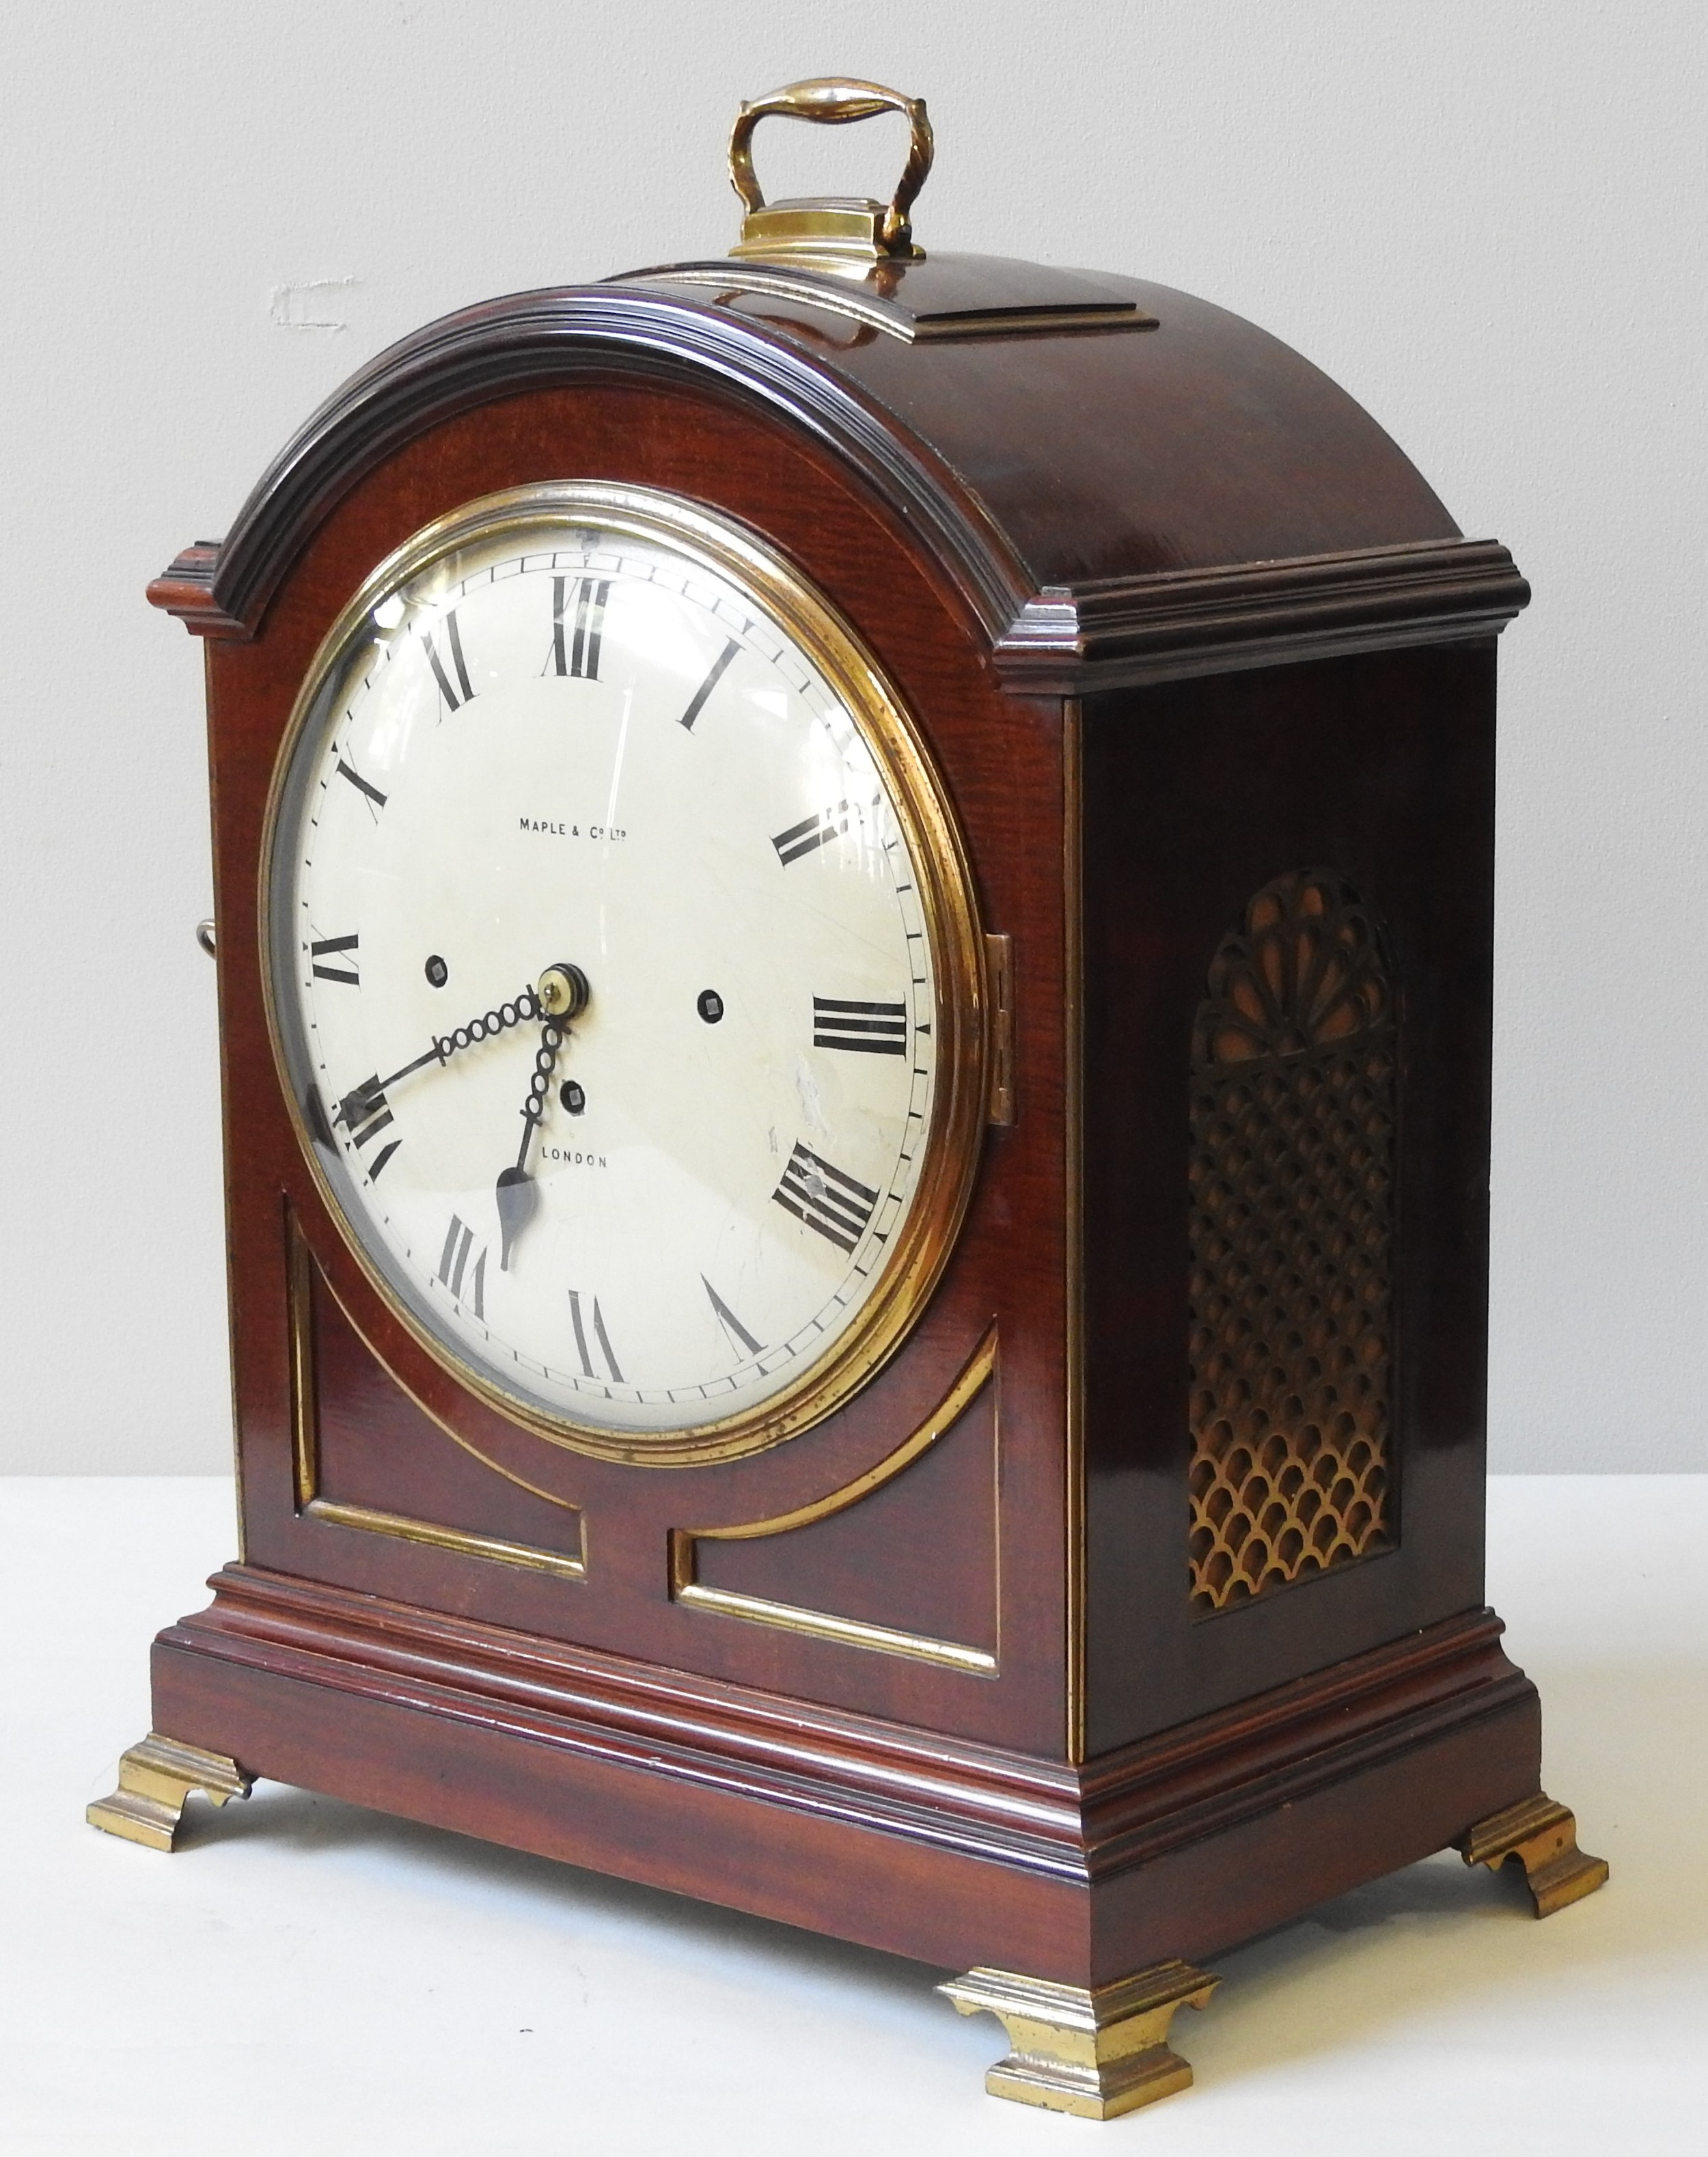 A REGENCY STYLE MAHOGANY BRACKET CLOCK, EARLY 20TH CENTURY, retailed by Maple & Co. Ltd, arched